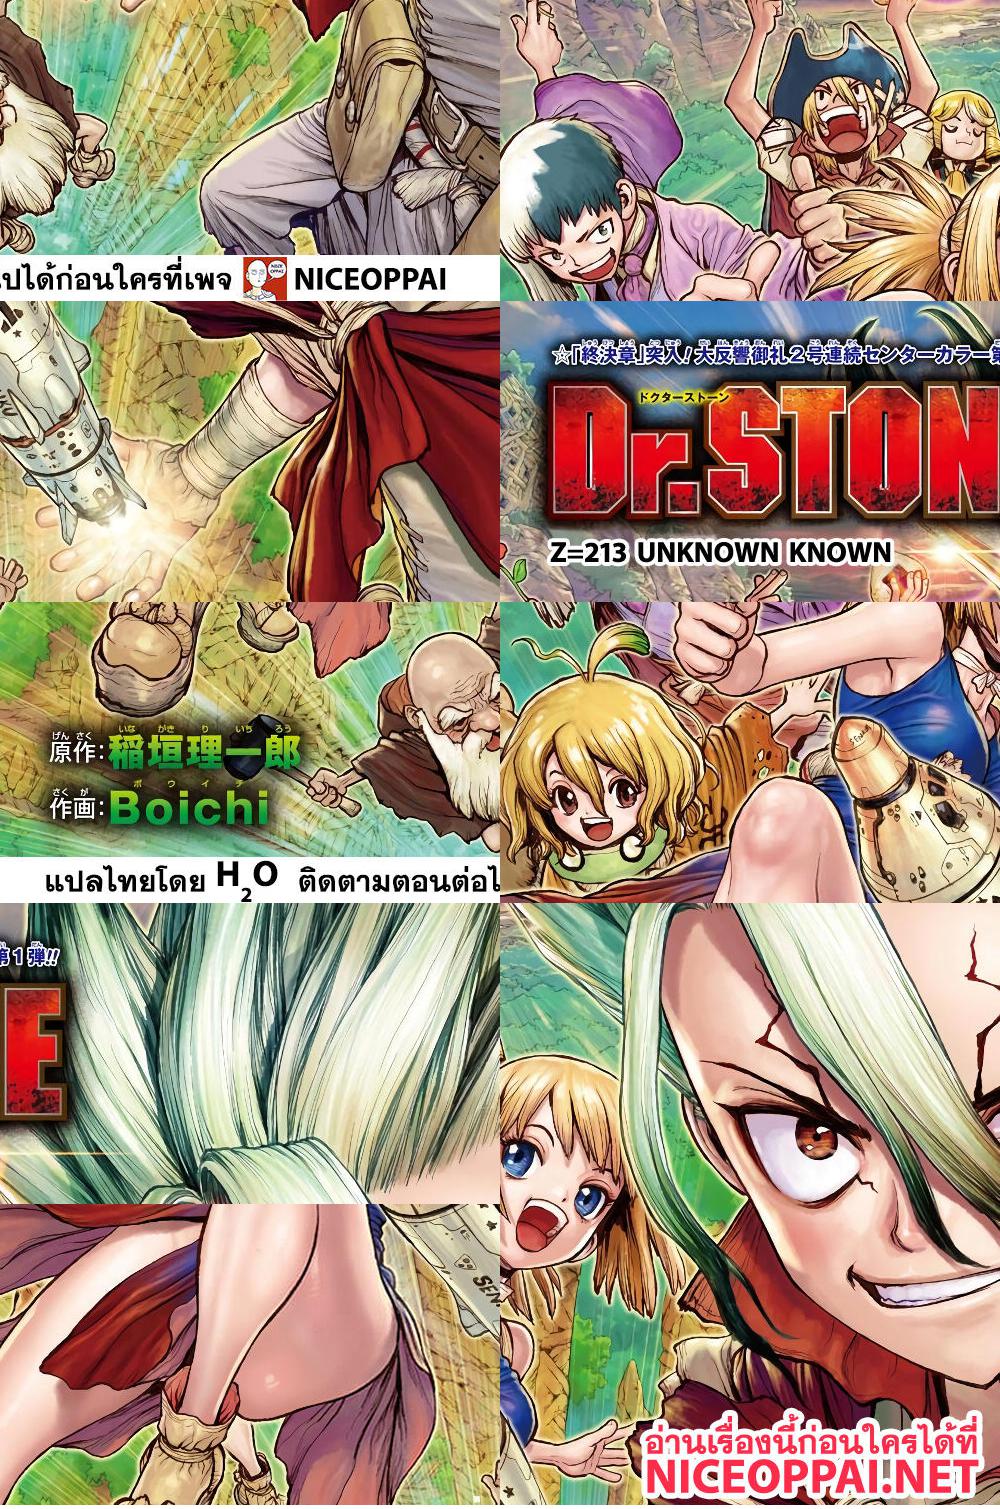 Dr.Stone - UNKNOWN KNOWN - 2